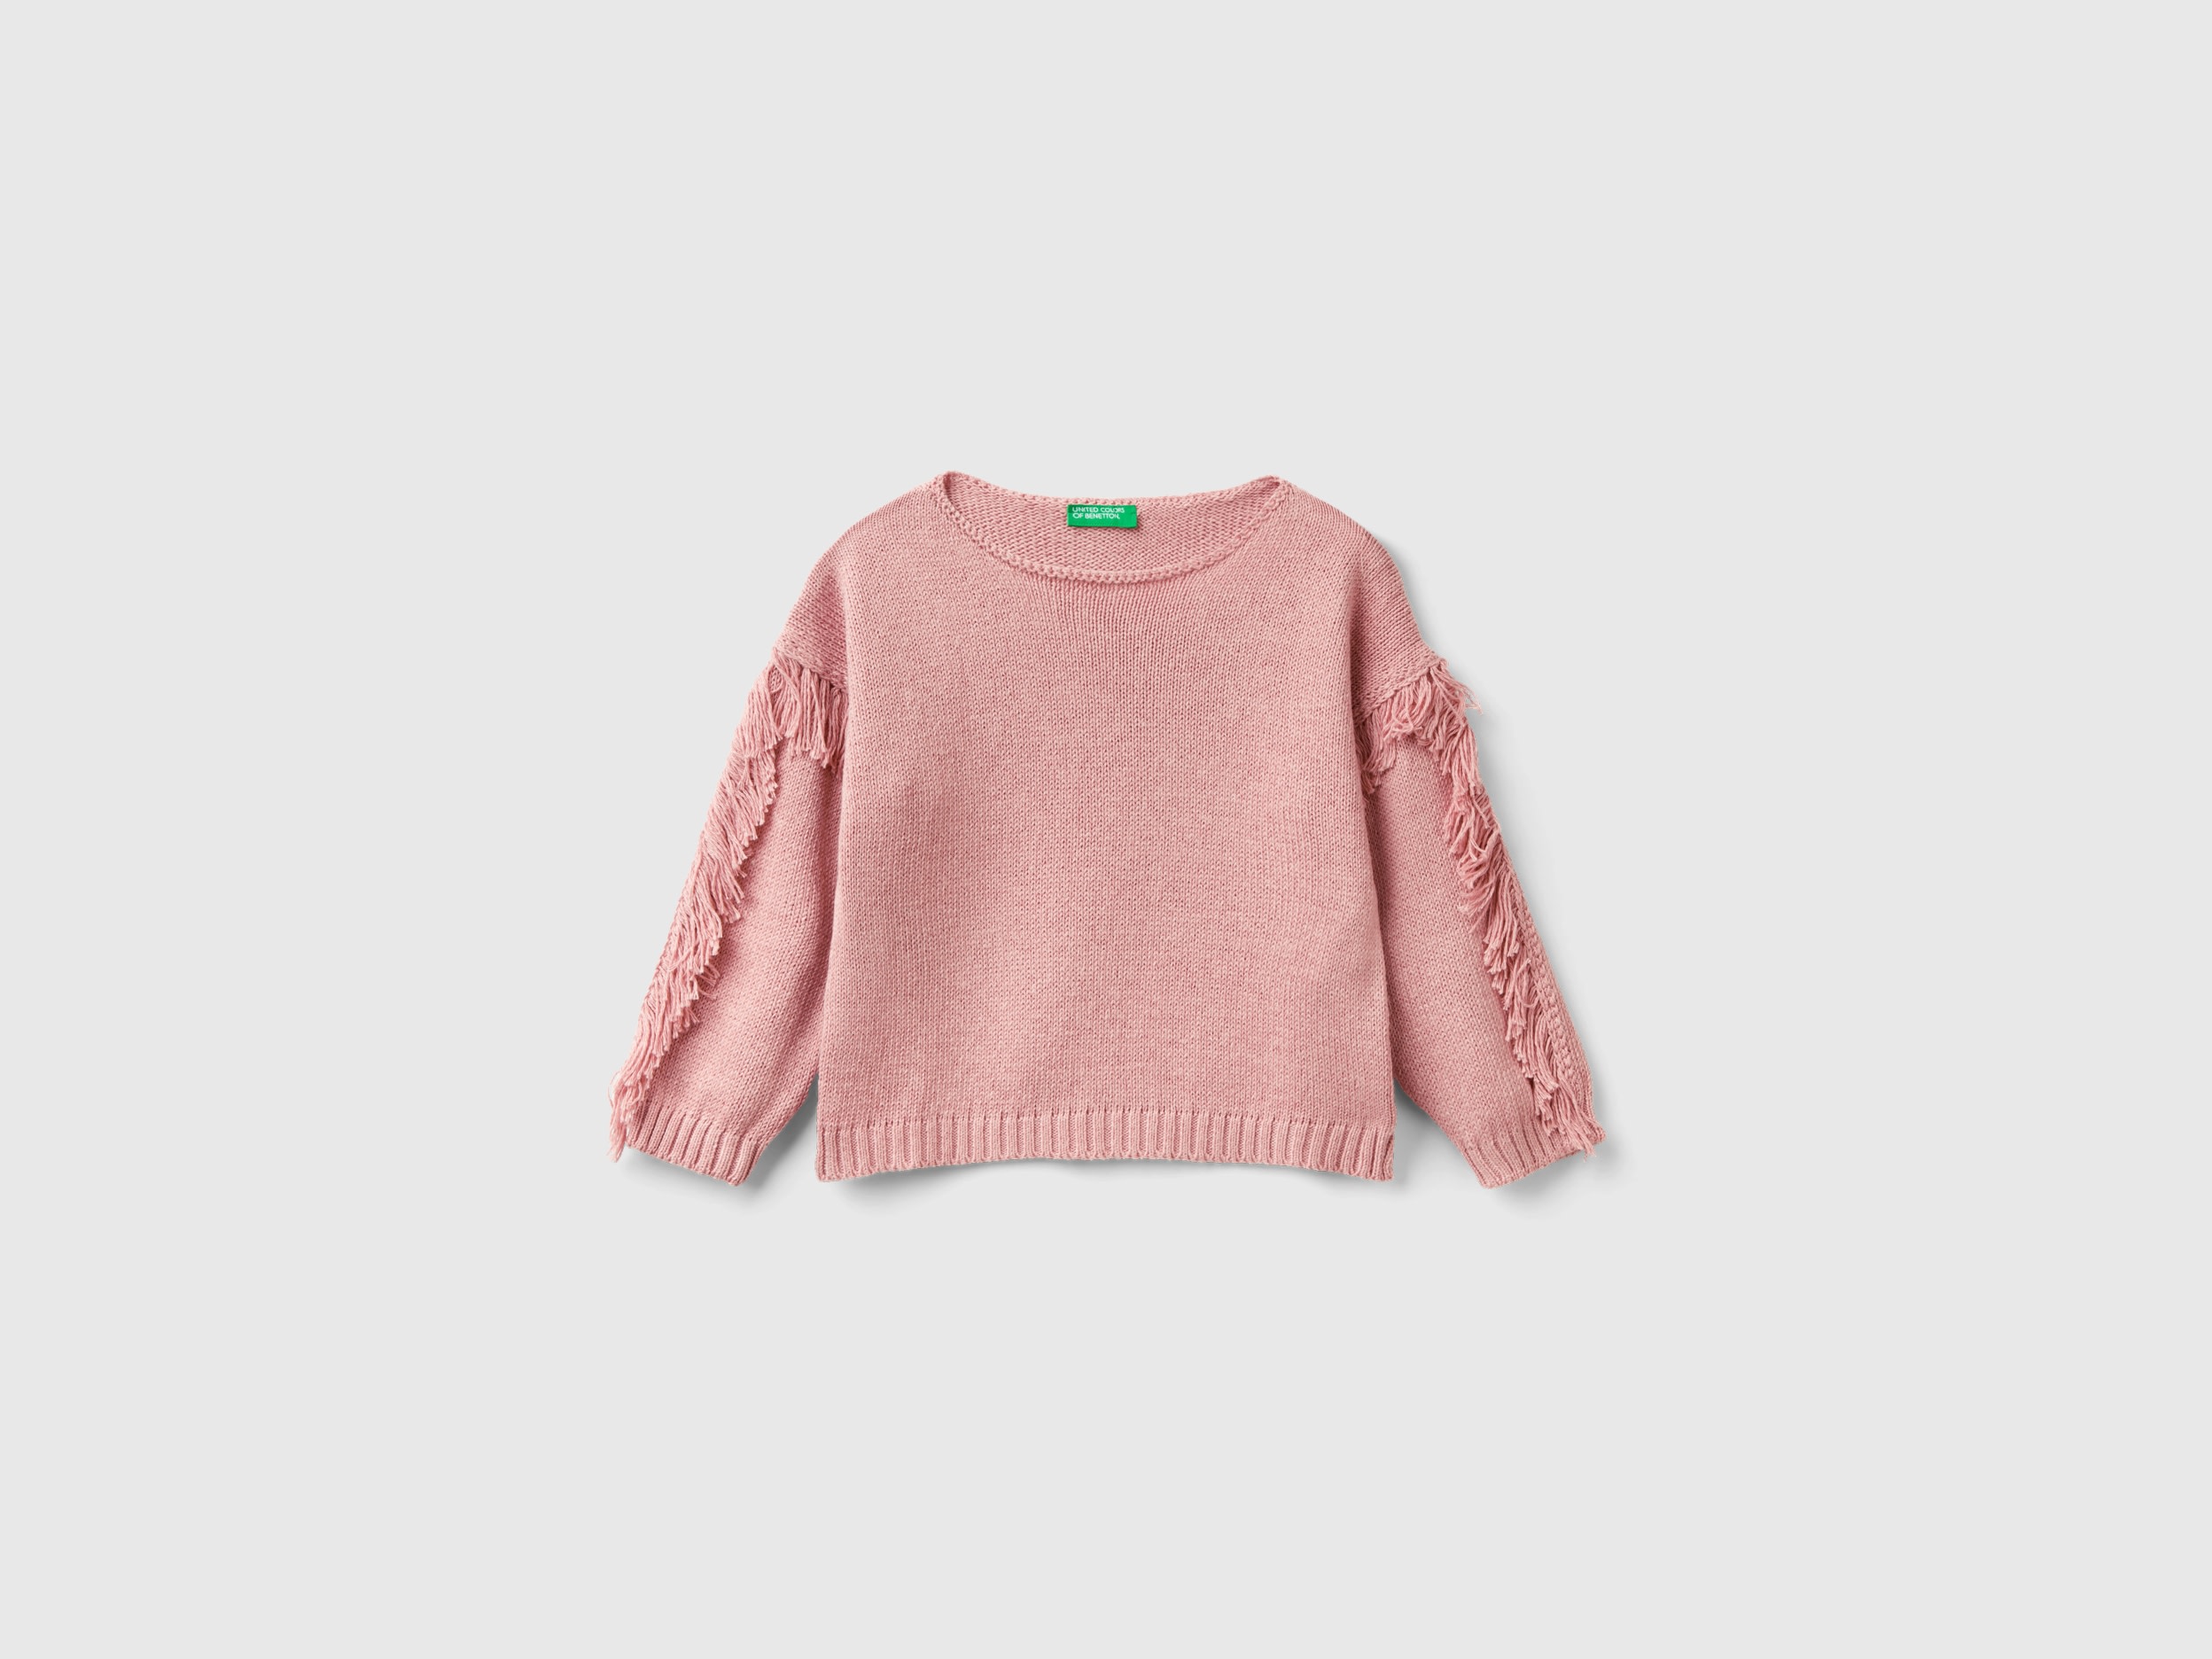 Image of Benetton, Sweater With Fringe, size 98, Pink, Kids